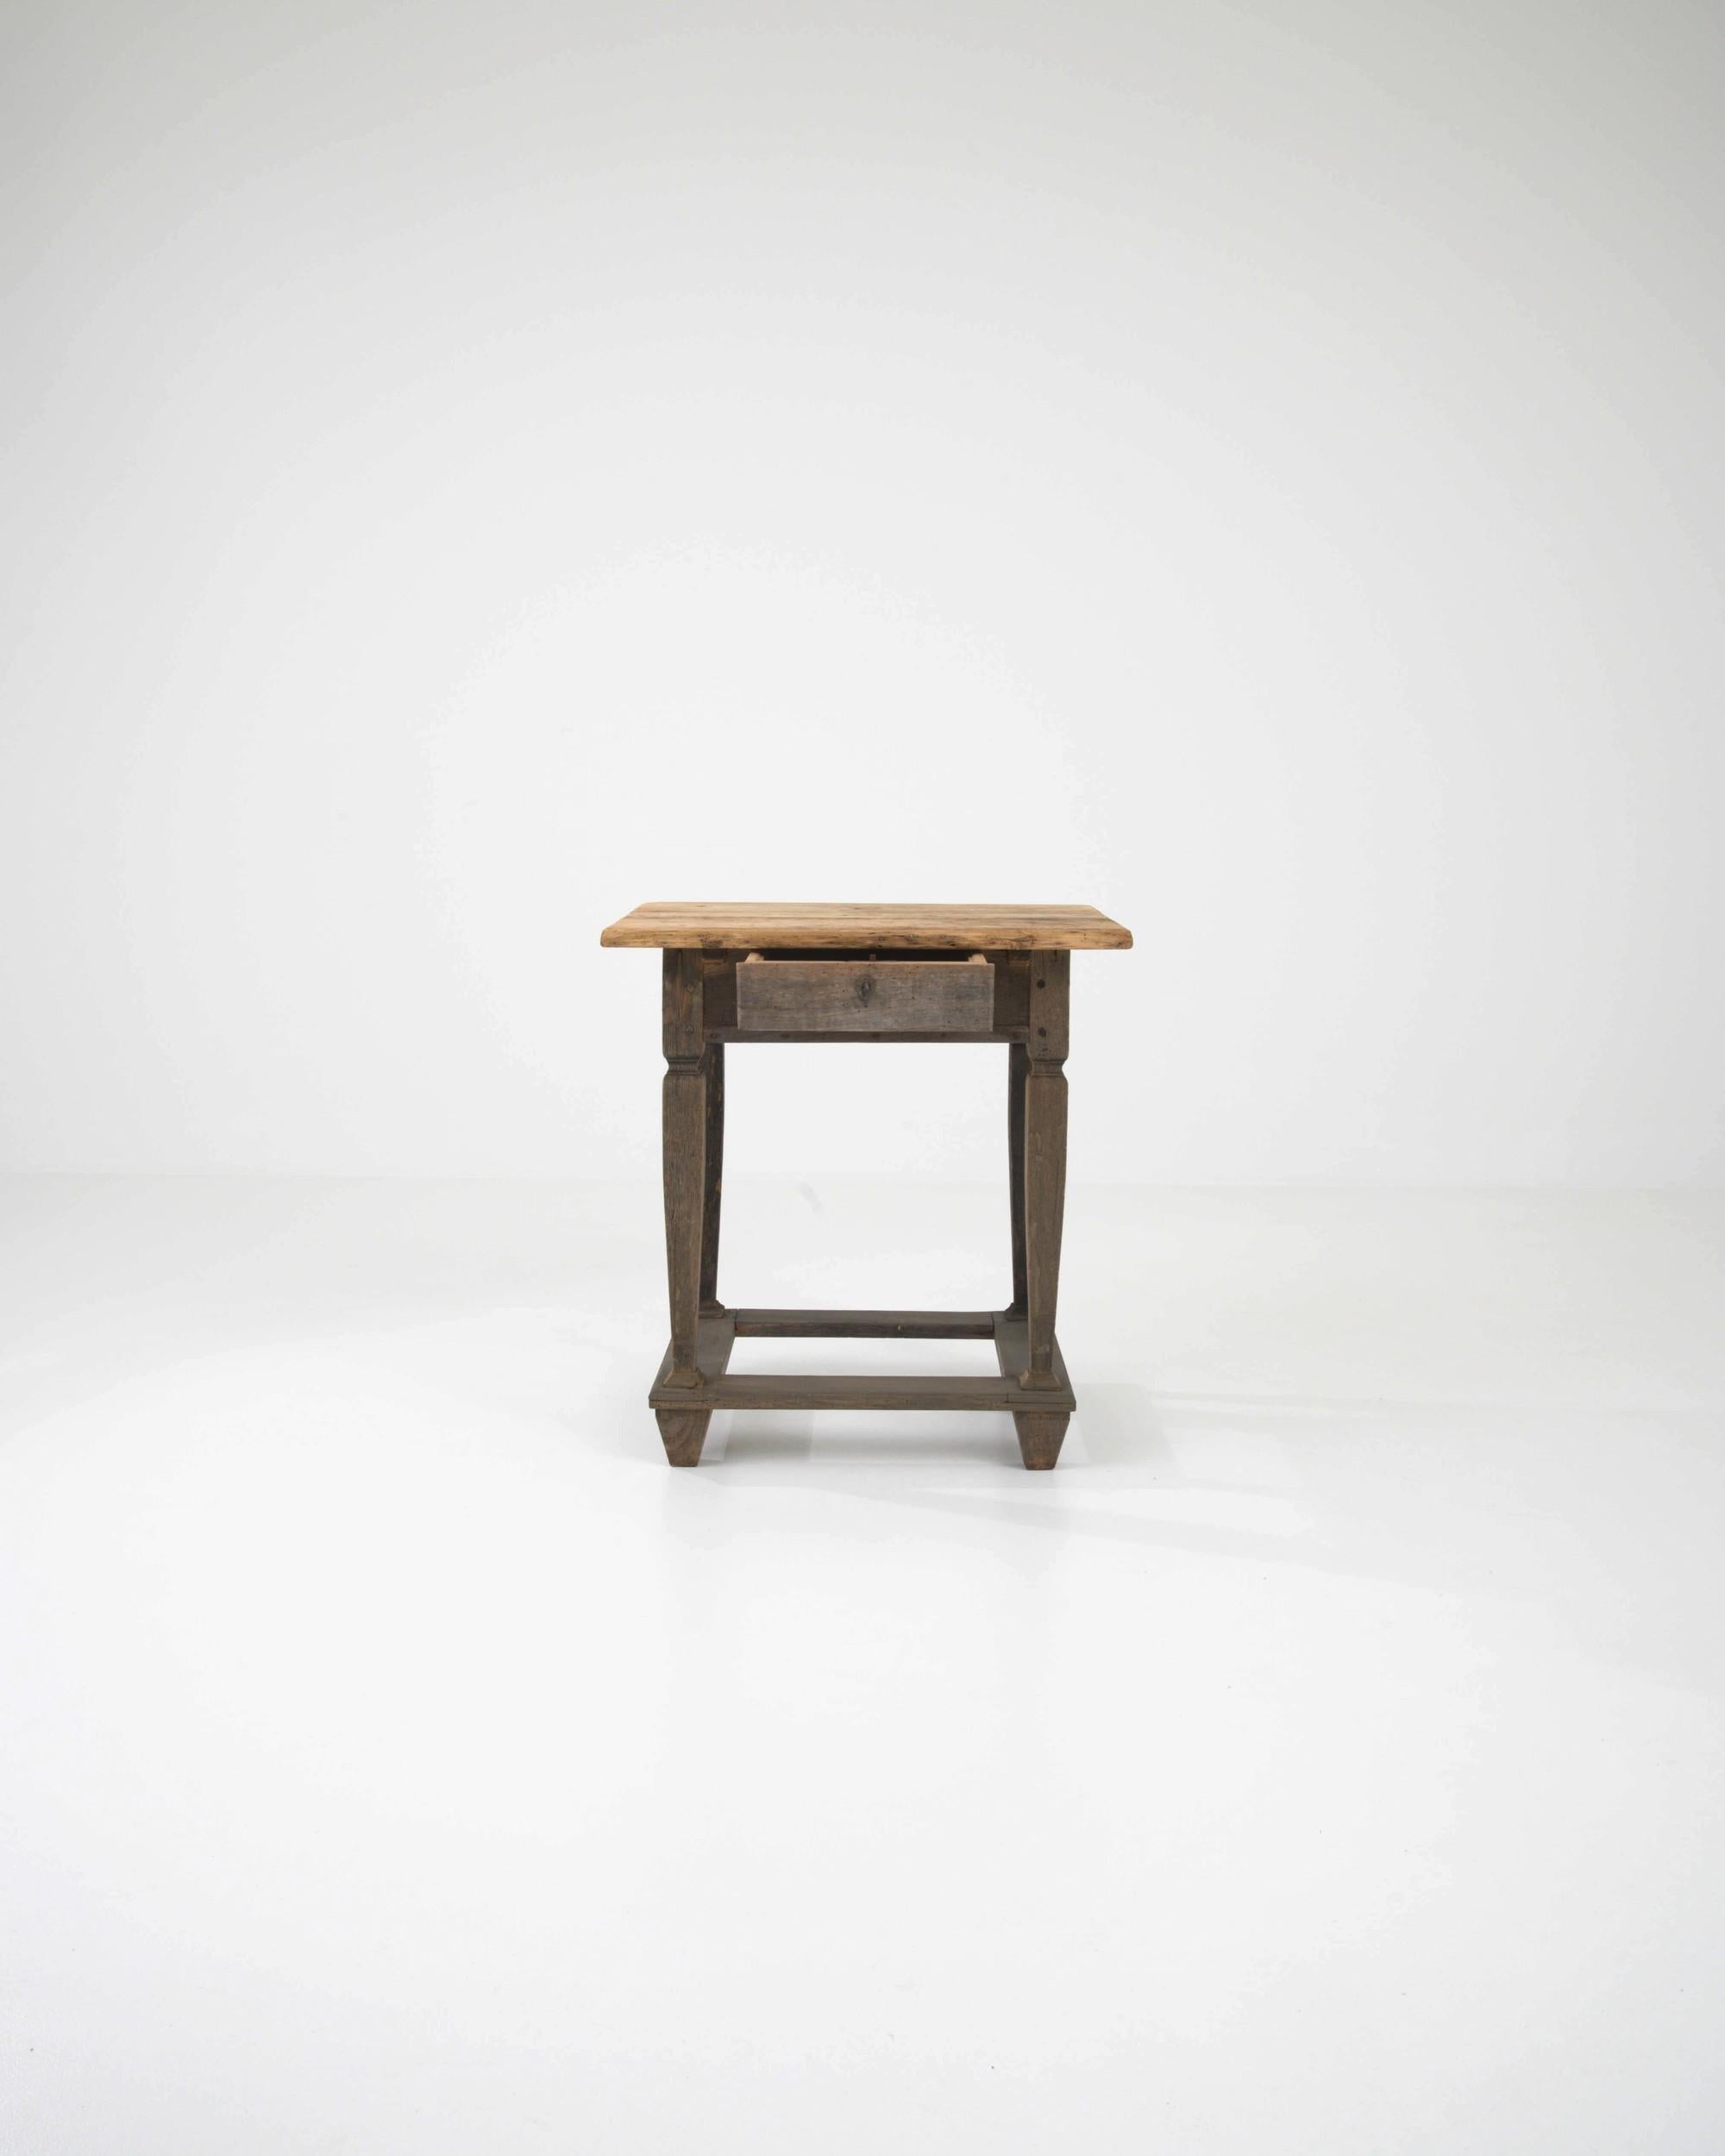 This antique wooden side table offers a delightful Provincial find. Made in France in the early 1800s, the silhouette is simple yet full of personality: chunky pyramidal feet are counterbalanced by slender, gracefully contoured legs. A small drawer